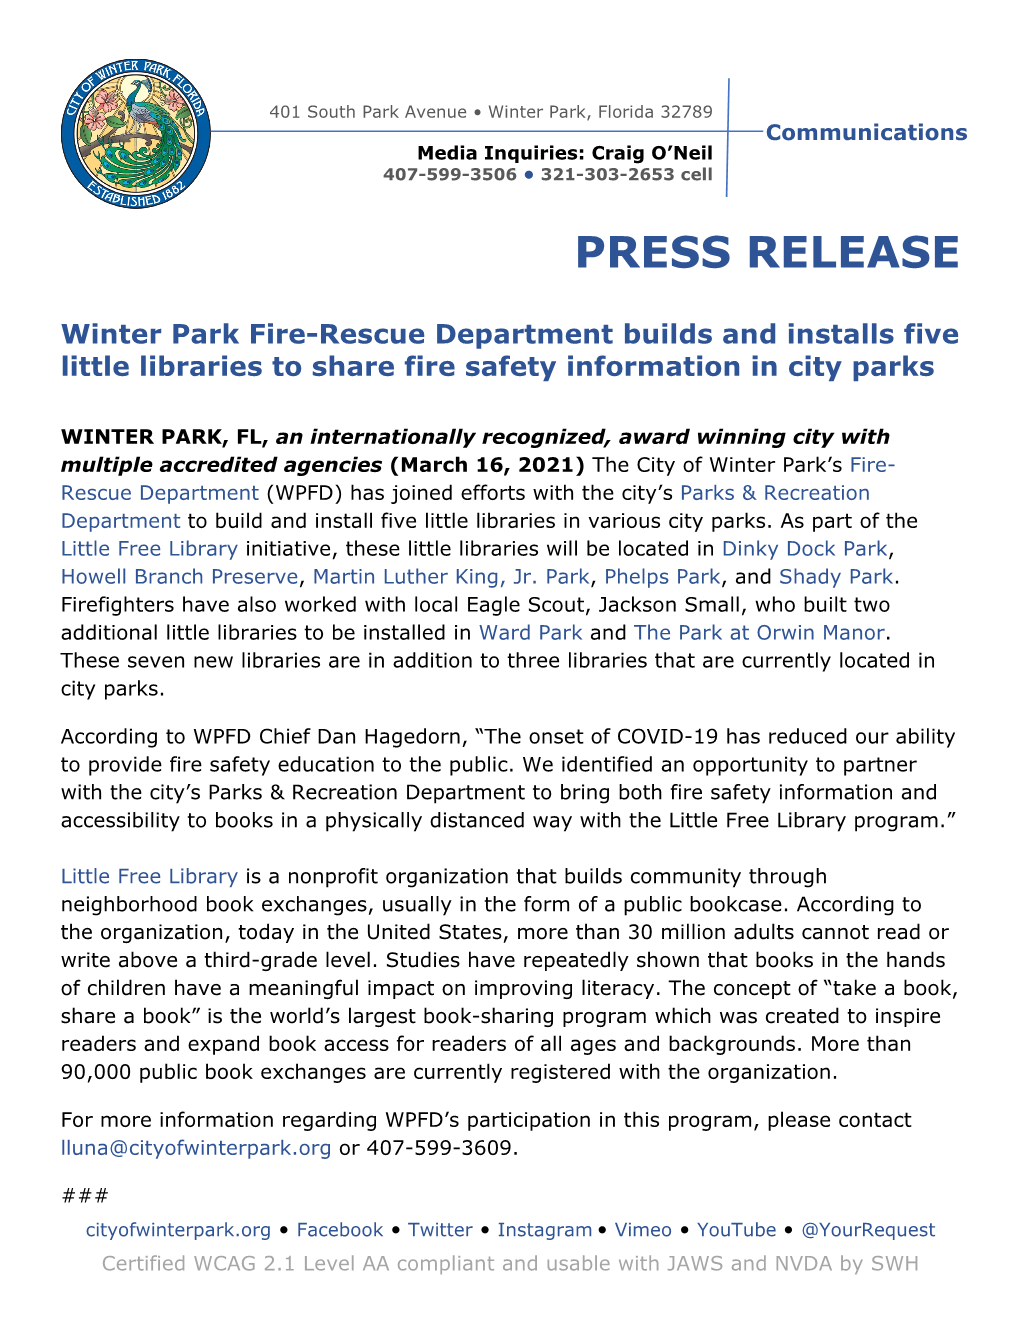 Winter Park Fire-Rescue Department Builds and Installs Five Little Libraries to Share Fire Safety Information in City Parks